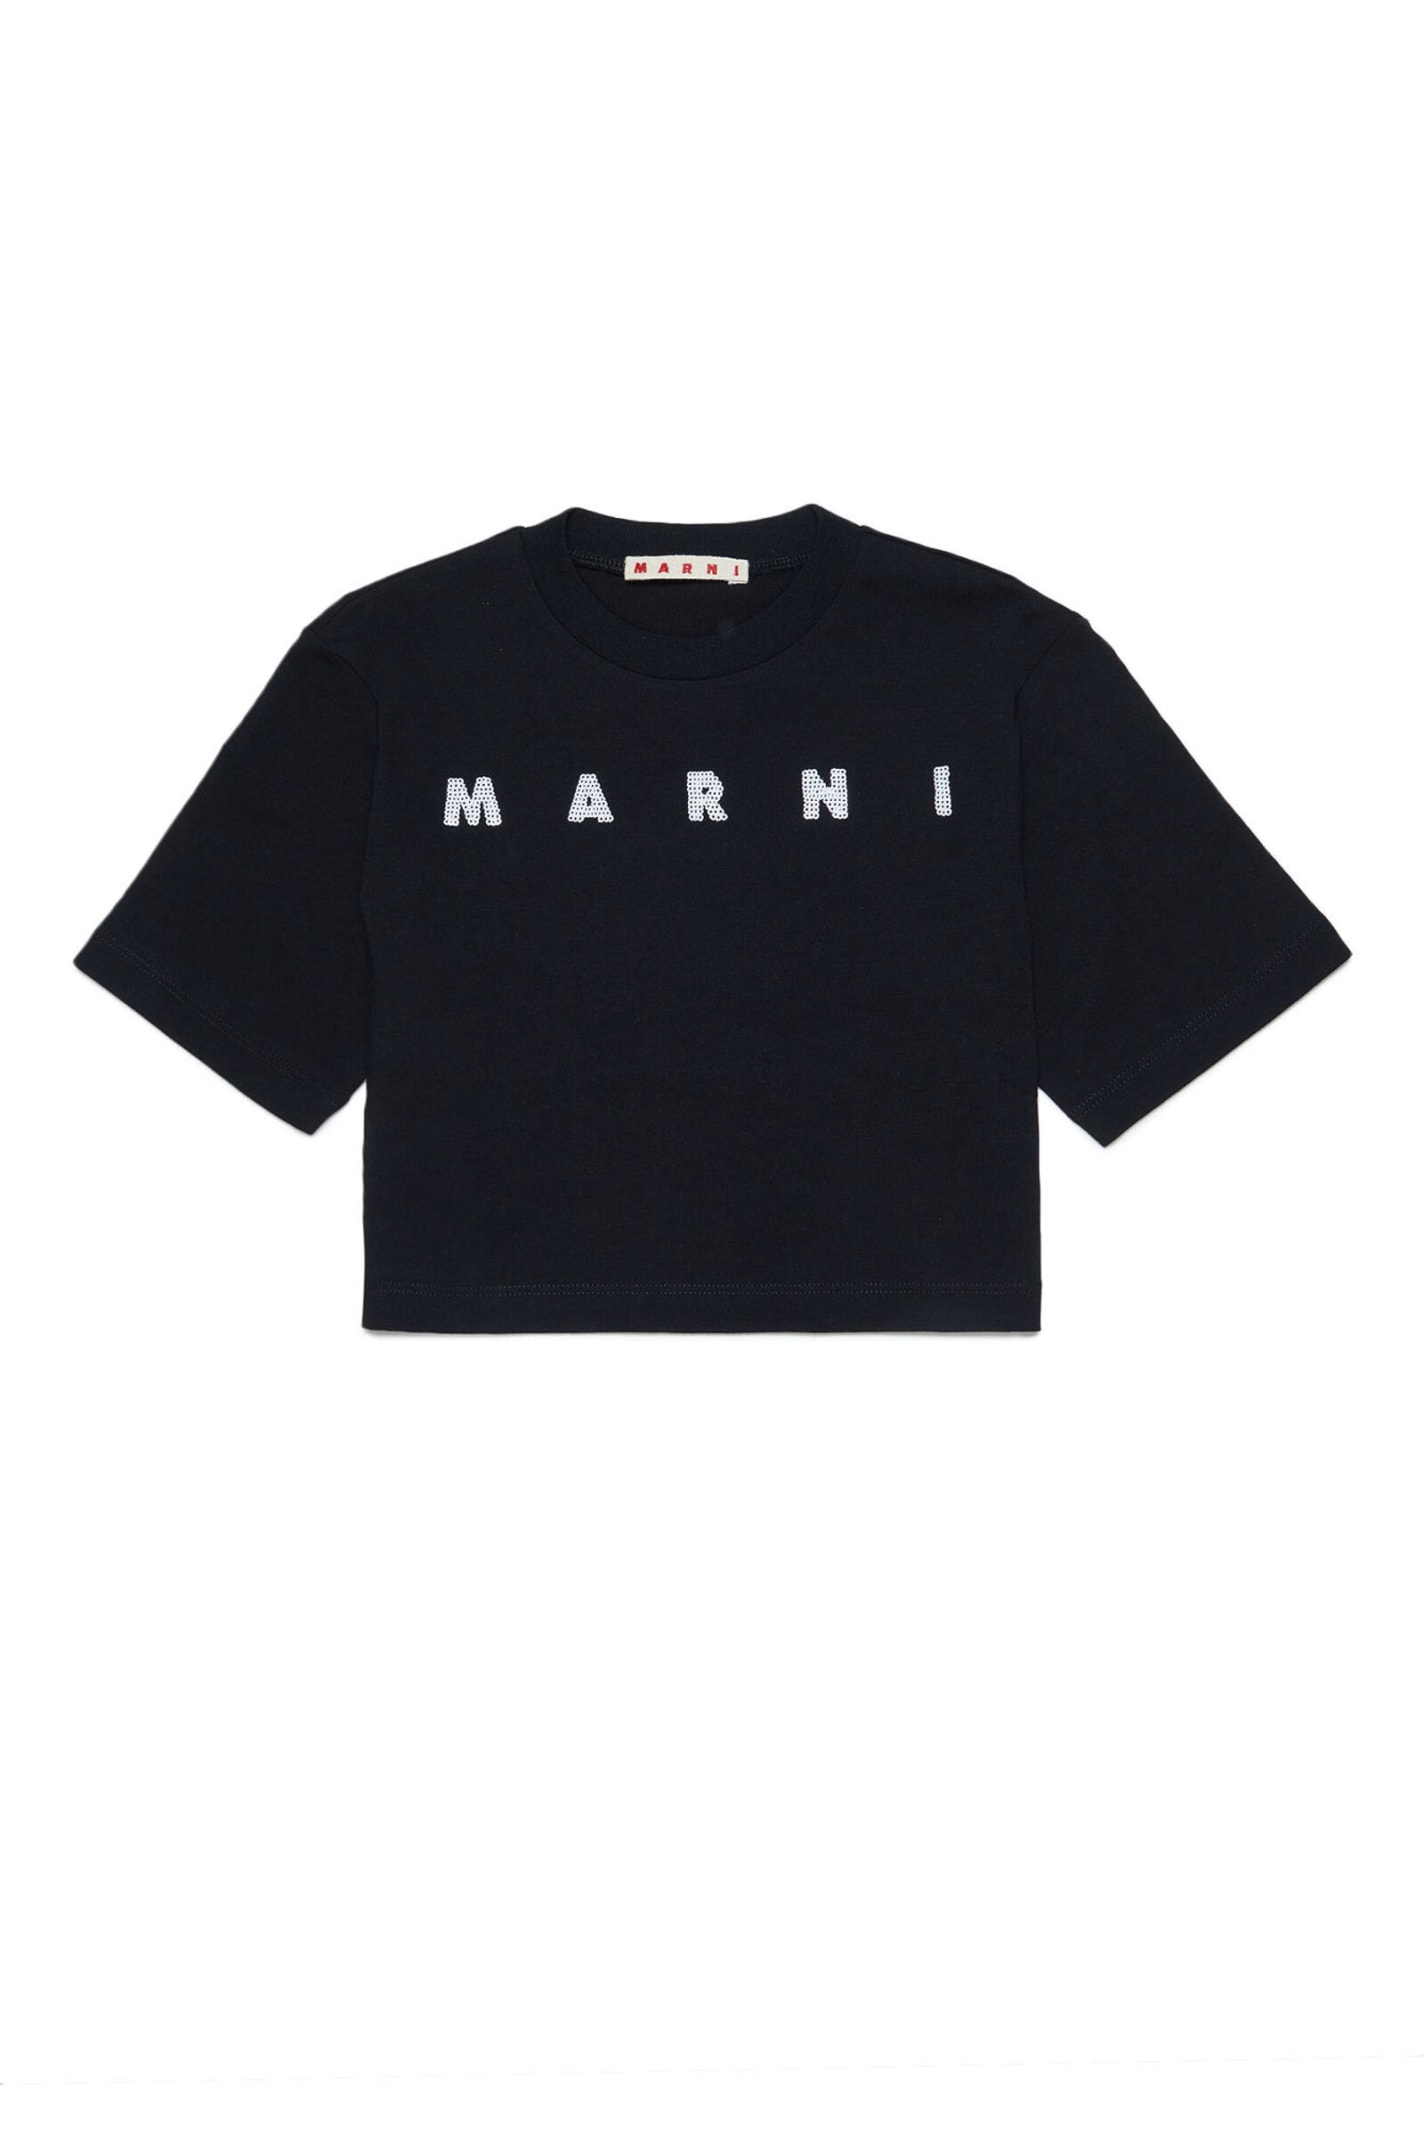 MARNI MT209F T-SHIRT MARNI BLACK JERSEY CROPPED T-SHIRT WITH SEQUIN LOGO